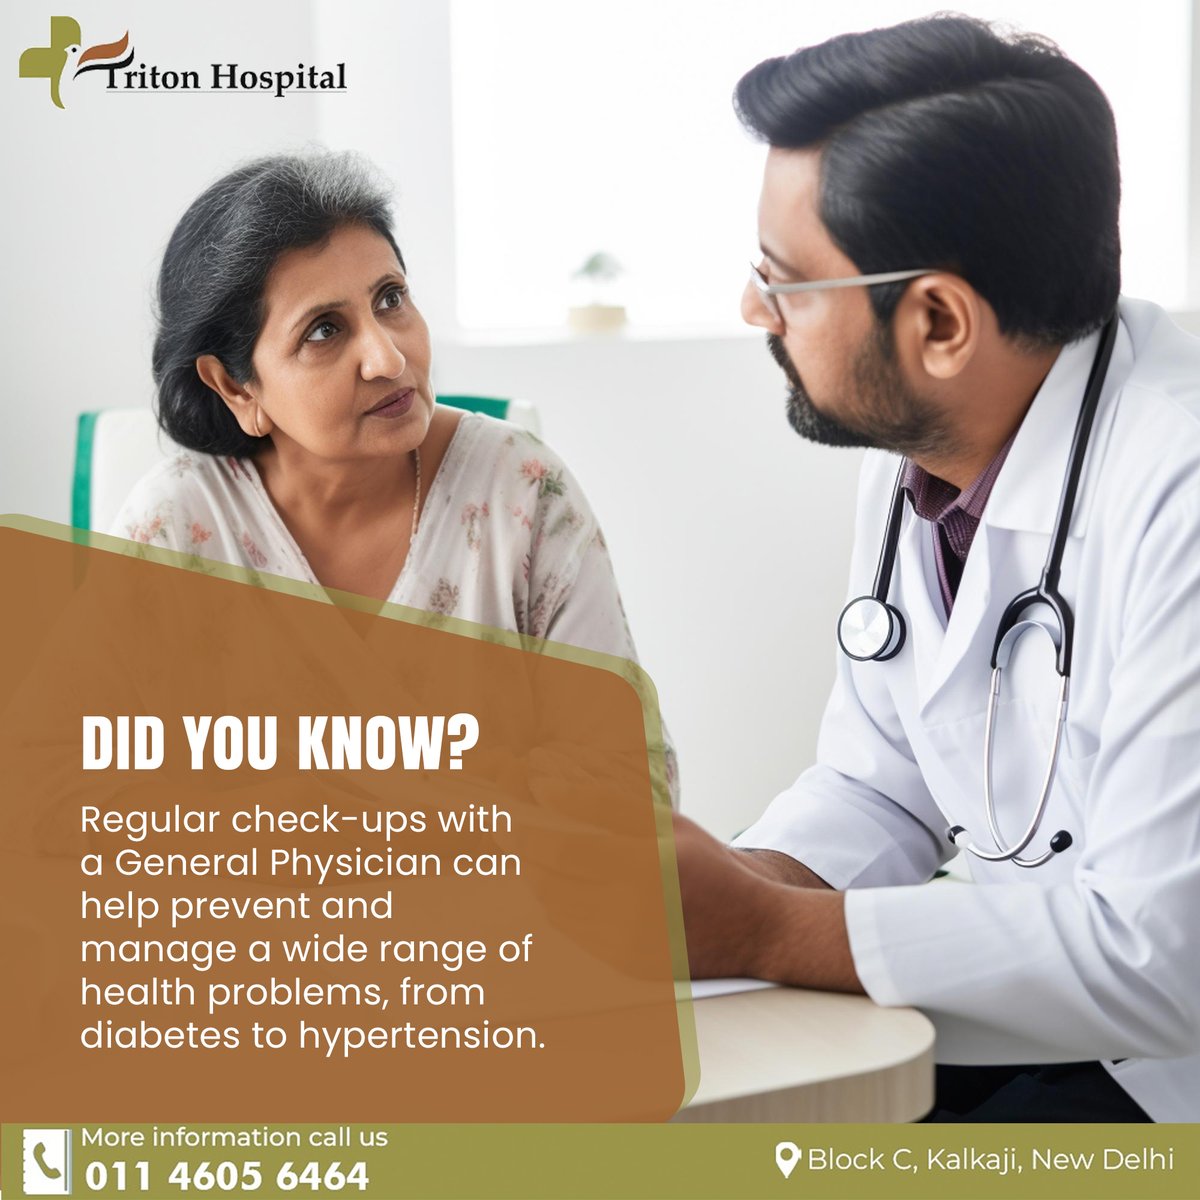 Regular check-ups with a general physician can be your best defense against a wide range of health problems, including diabetes and hypertension.

.

.

.

#tritonhospital #generalphysician #physician #healthcheckup #checkup #regularcheckup #diabetes #hypertension